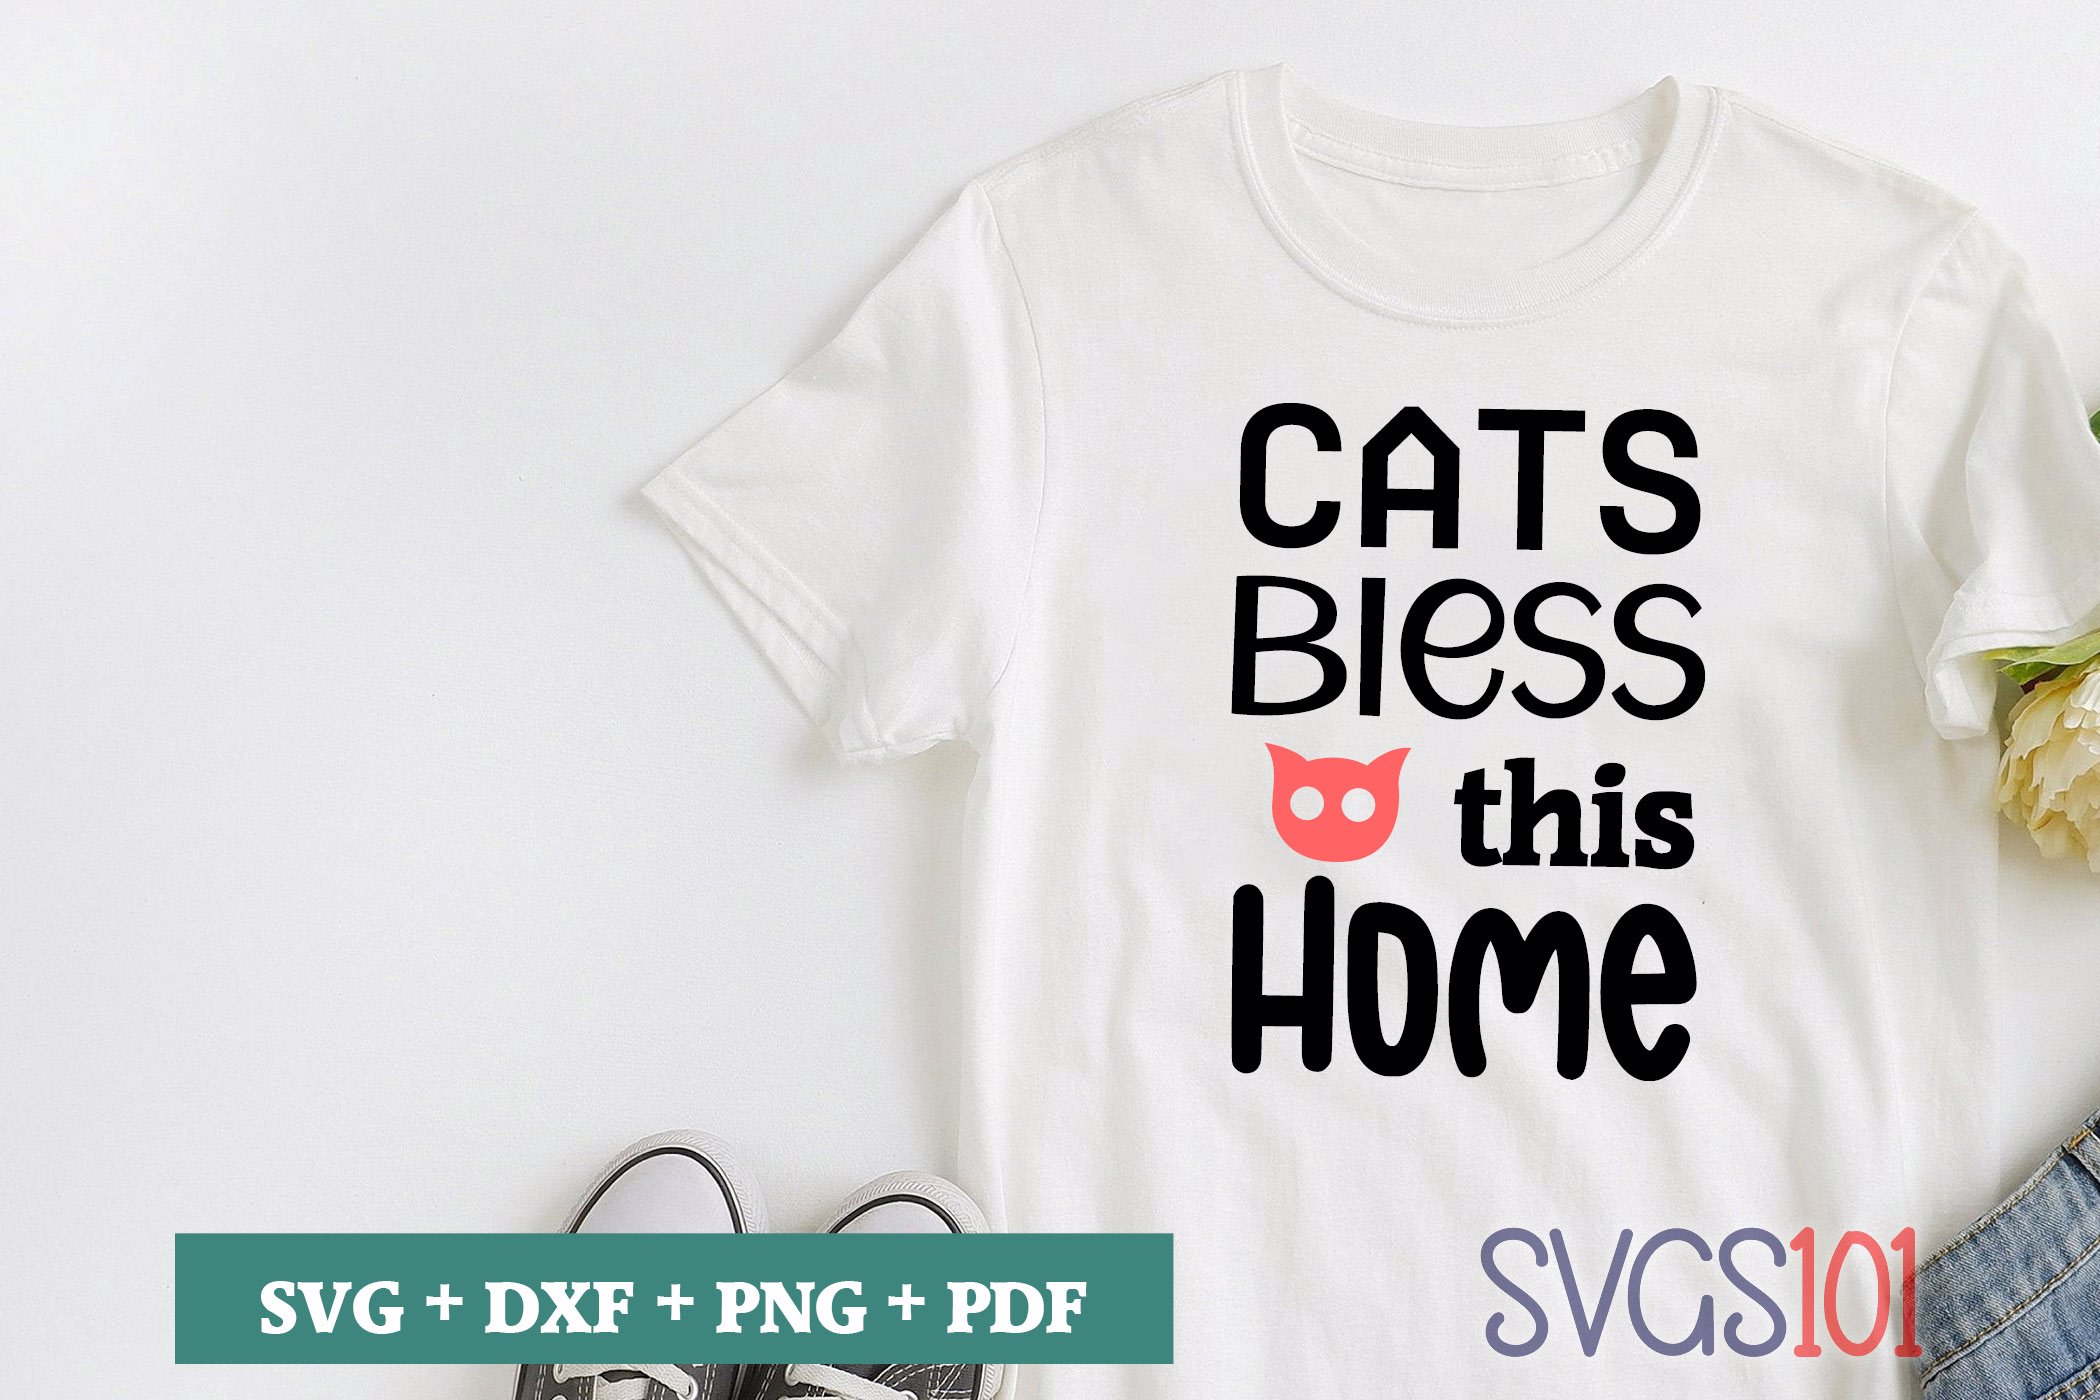 Cats bless this Home